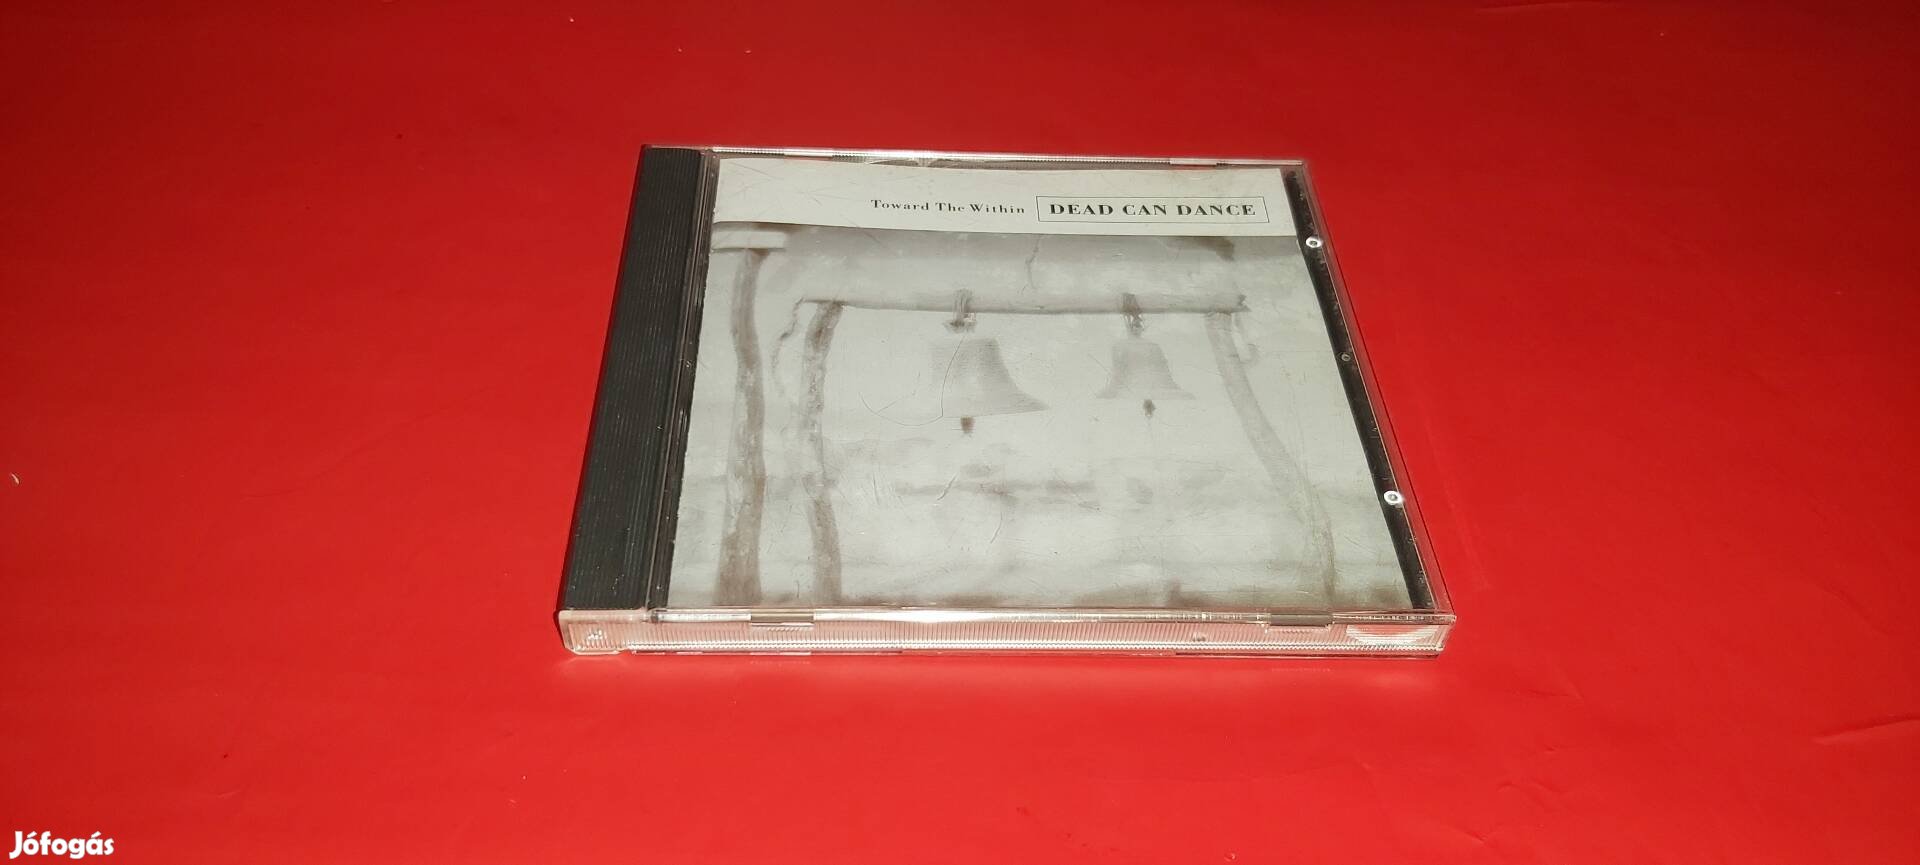 Dead Can Dance Toward the within Cd 1994